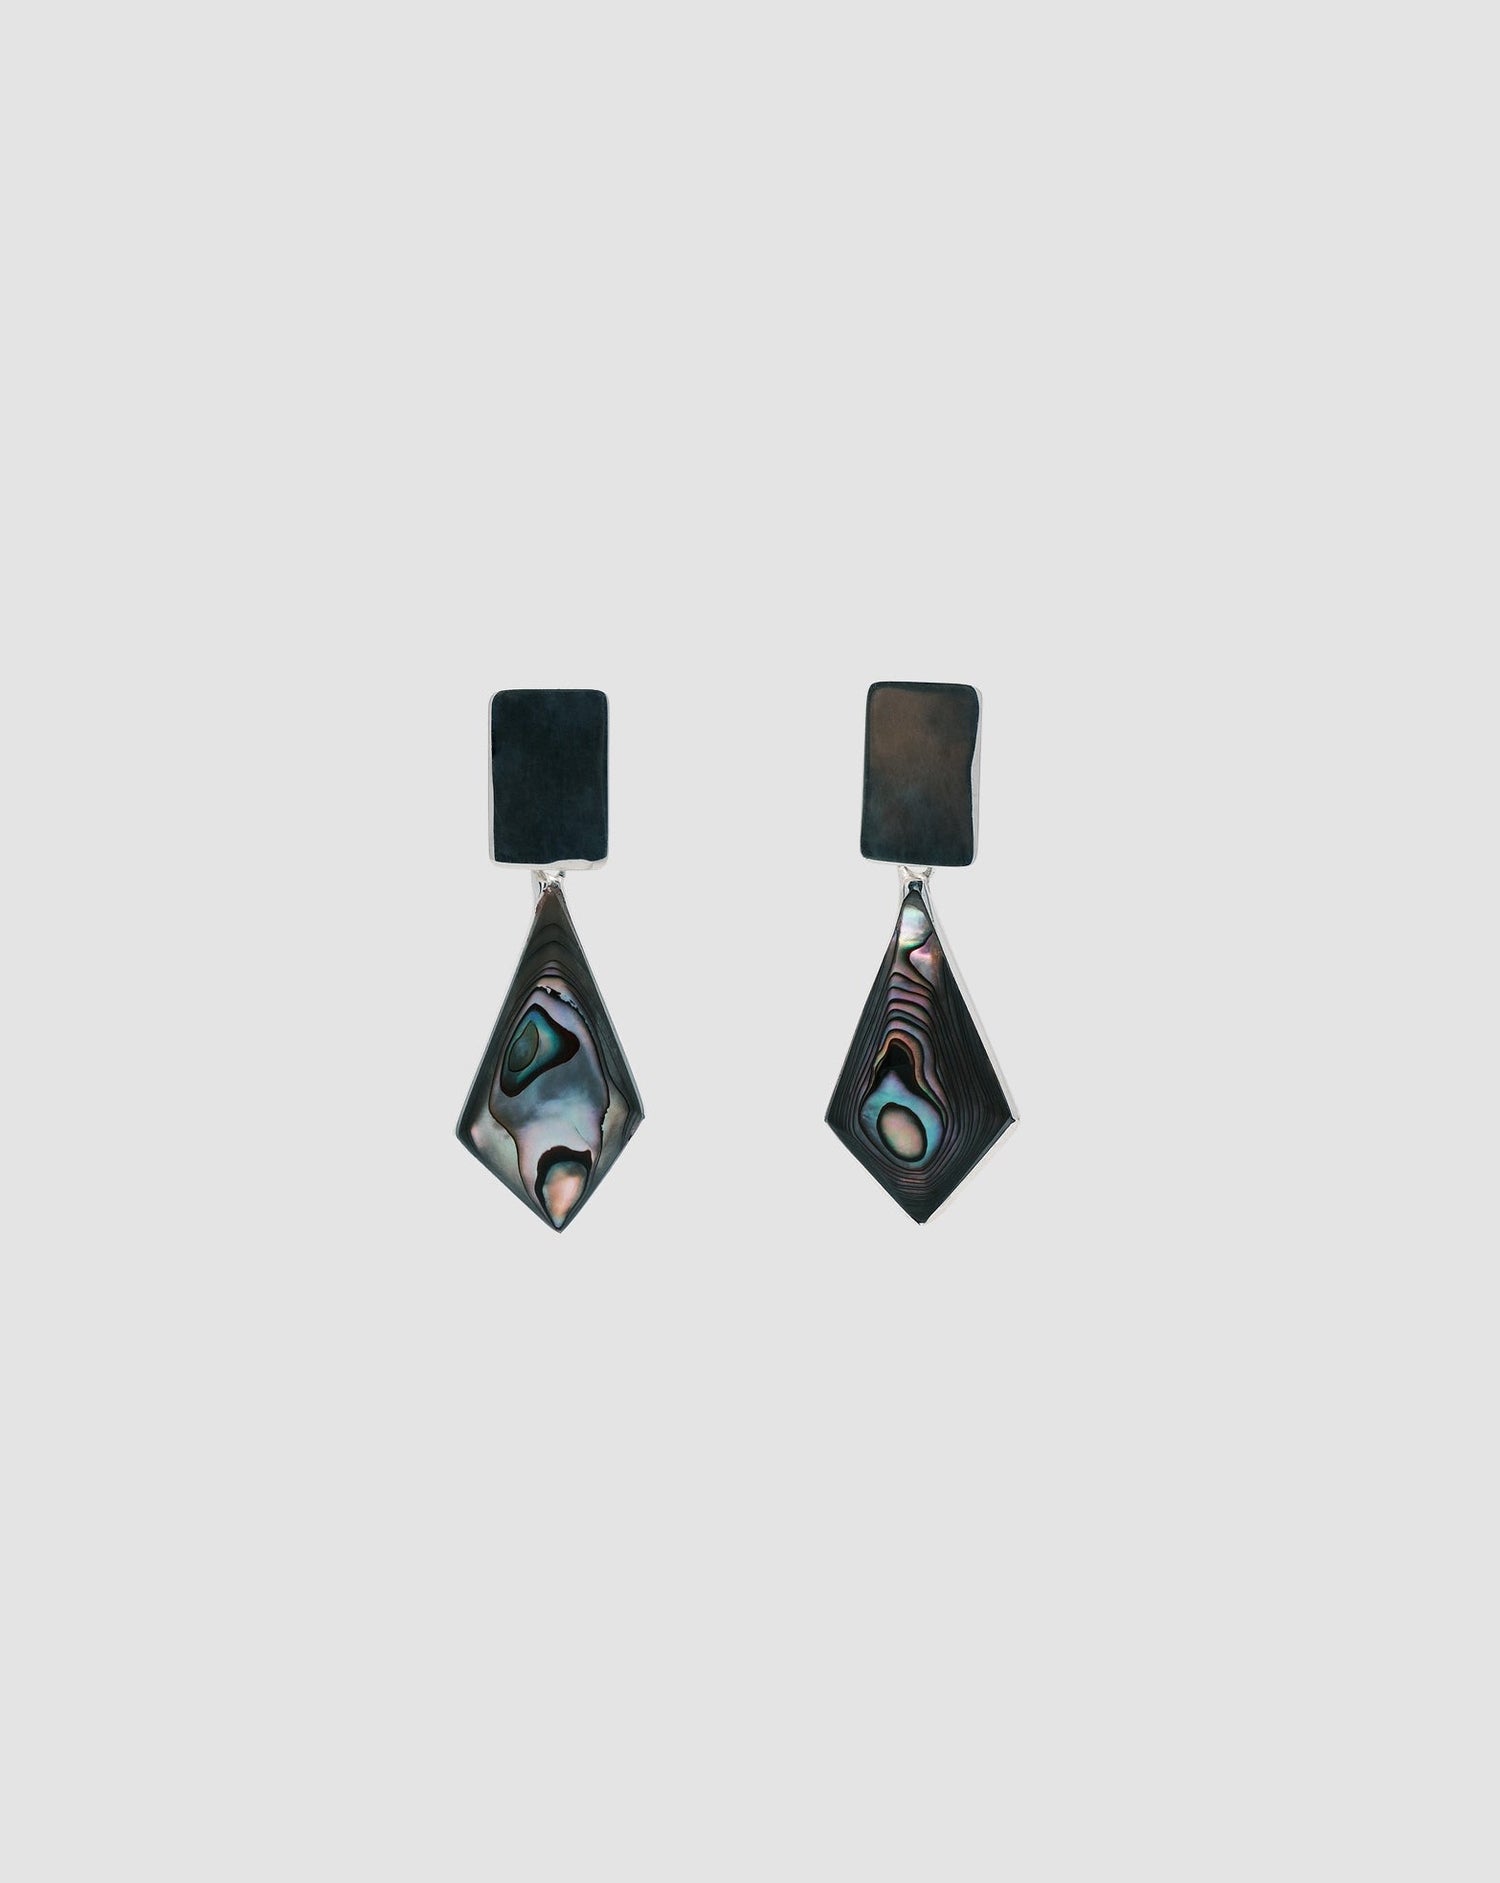 Earrings on a grey background that feature silver rectangle studs with abalone kite shaped charms